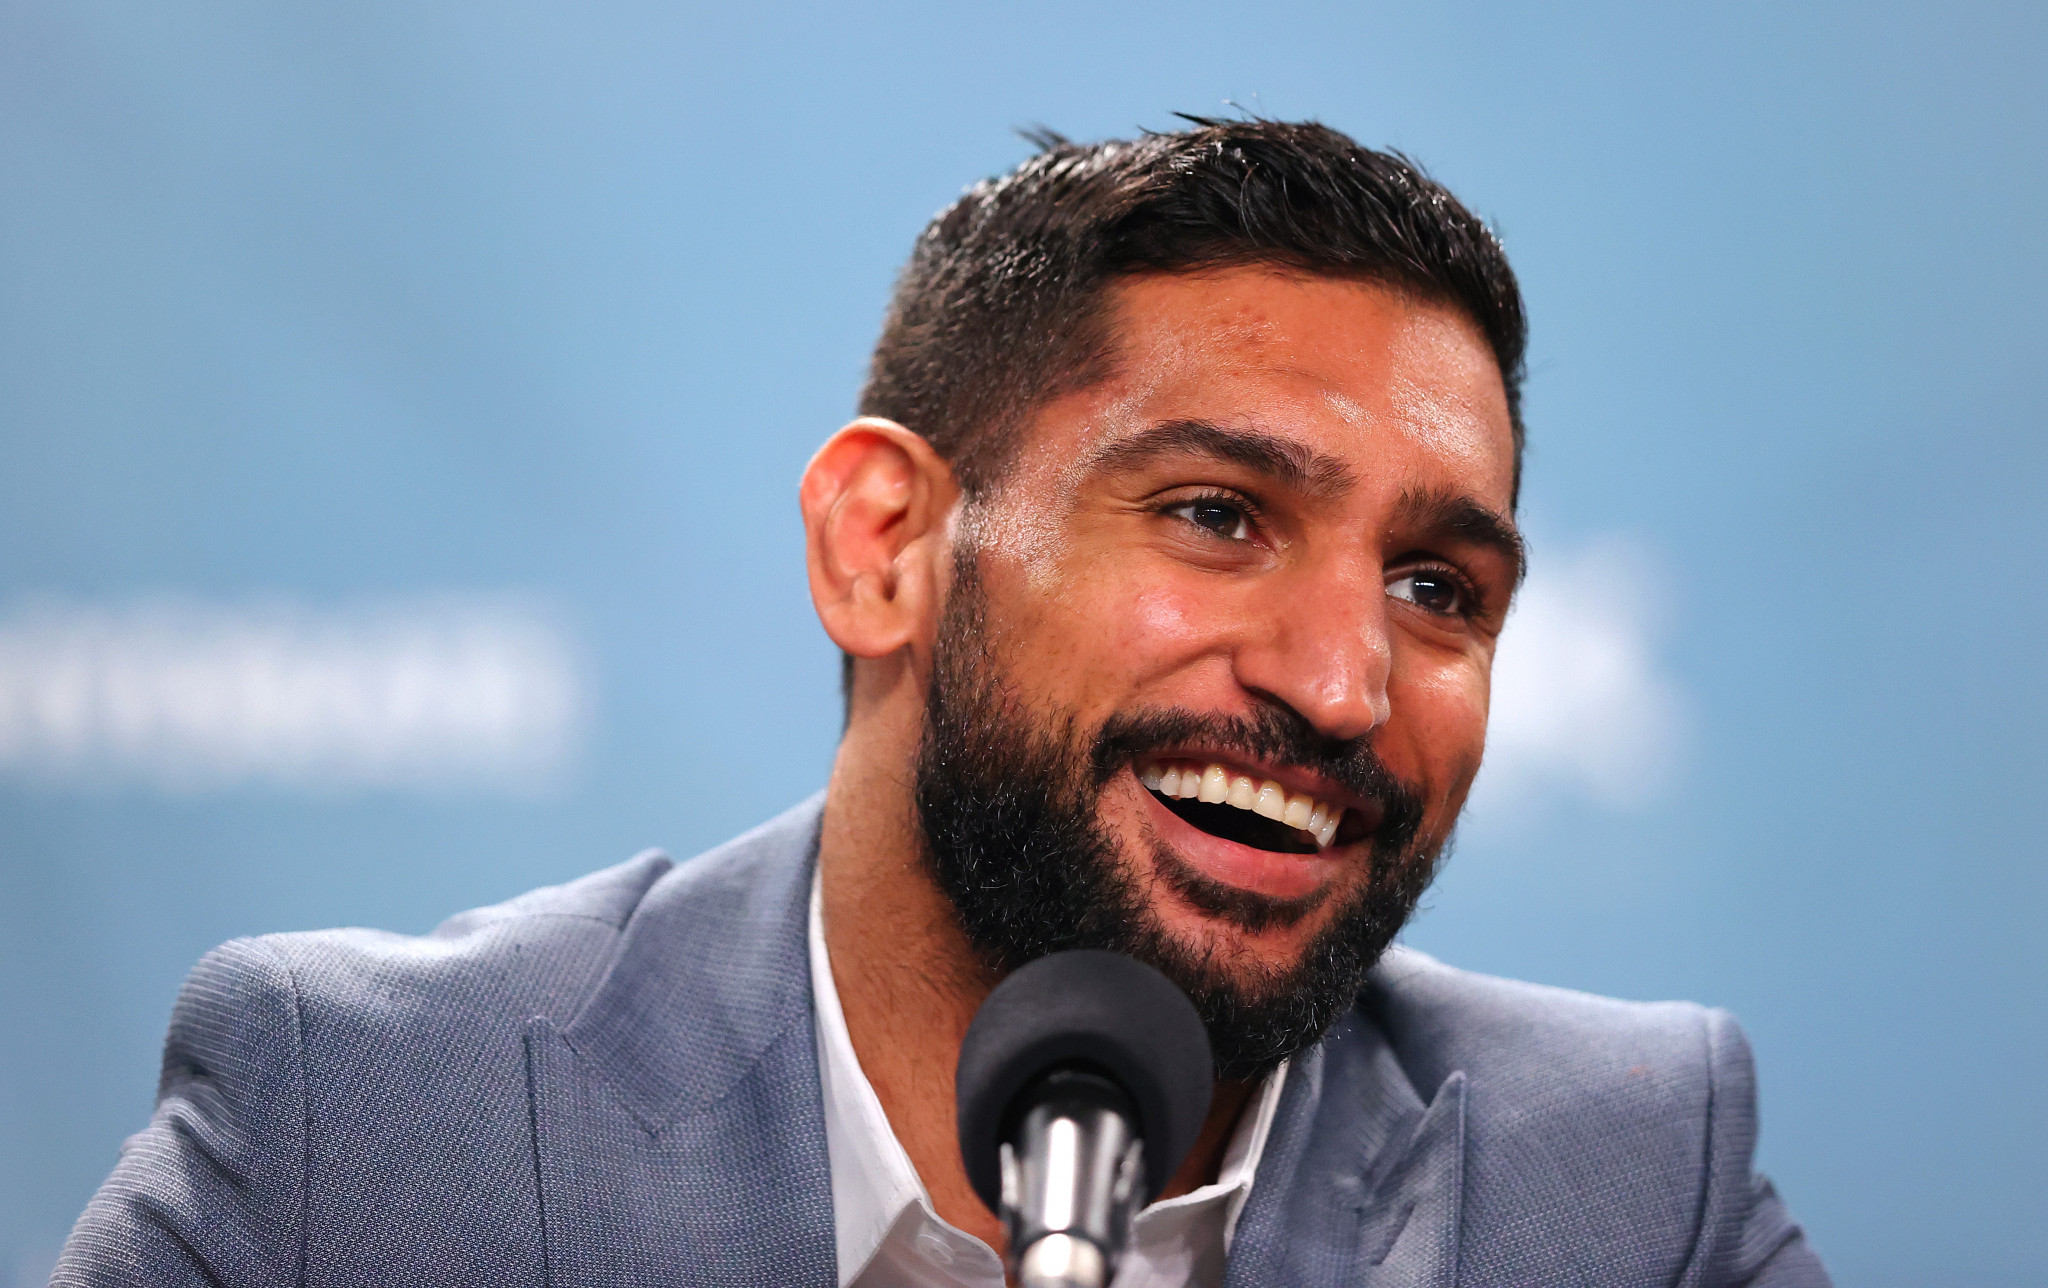 Olympic boxing silver medallist Amir Khan is currently a contestant in reality TV show I'm a Celebrity Get Me Out Of Here ©Getty Images